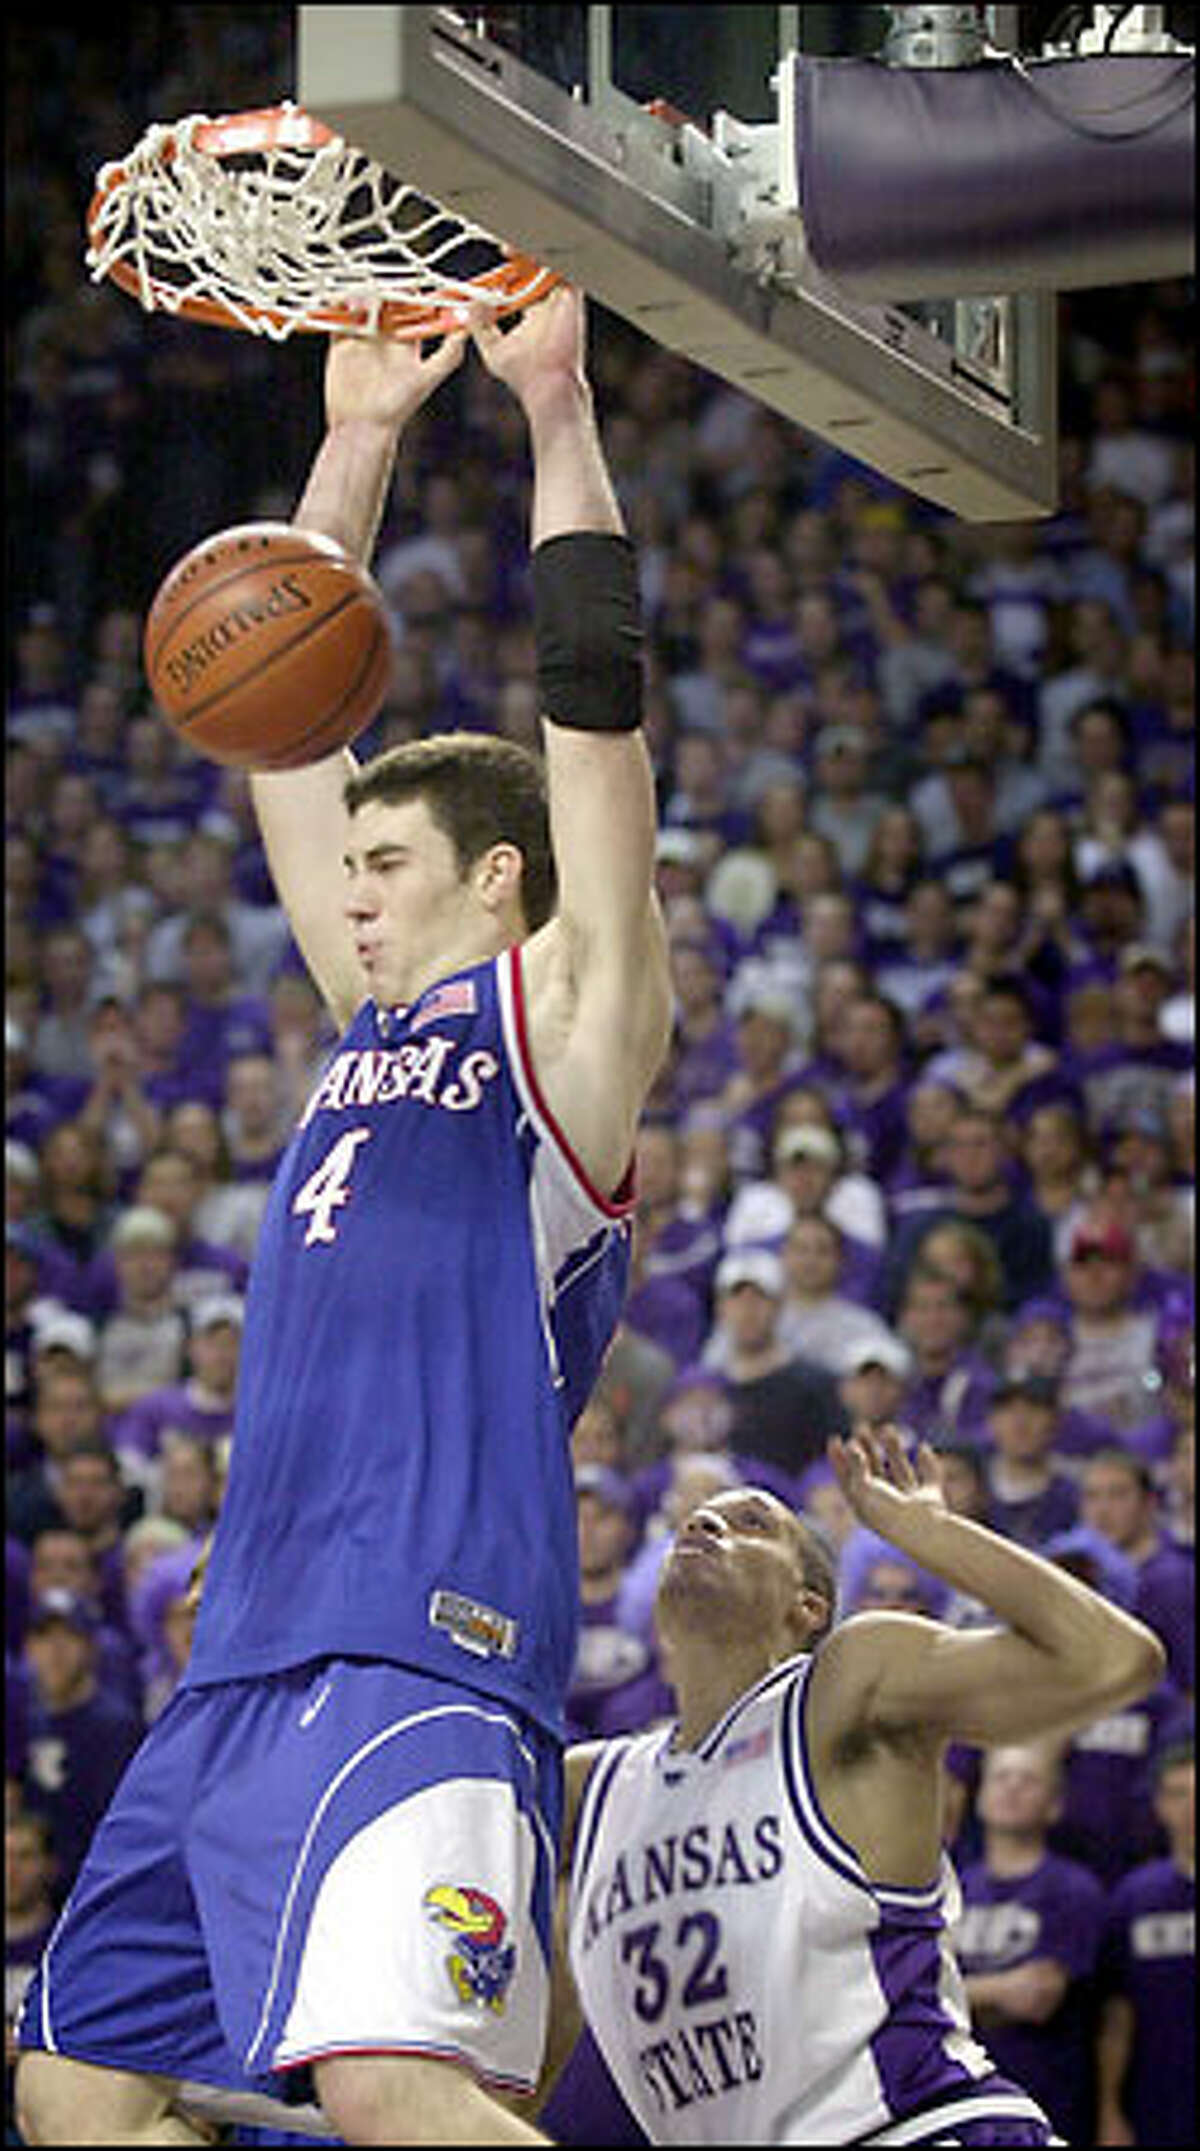 Kansas forward Nick Collison hammers down two of his 15 points in the first half as Kansas State guard Gilson DeJesus can only watch.